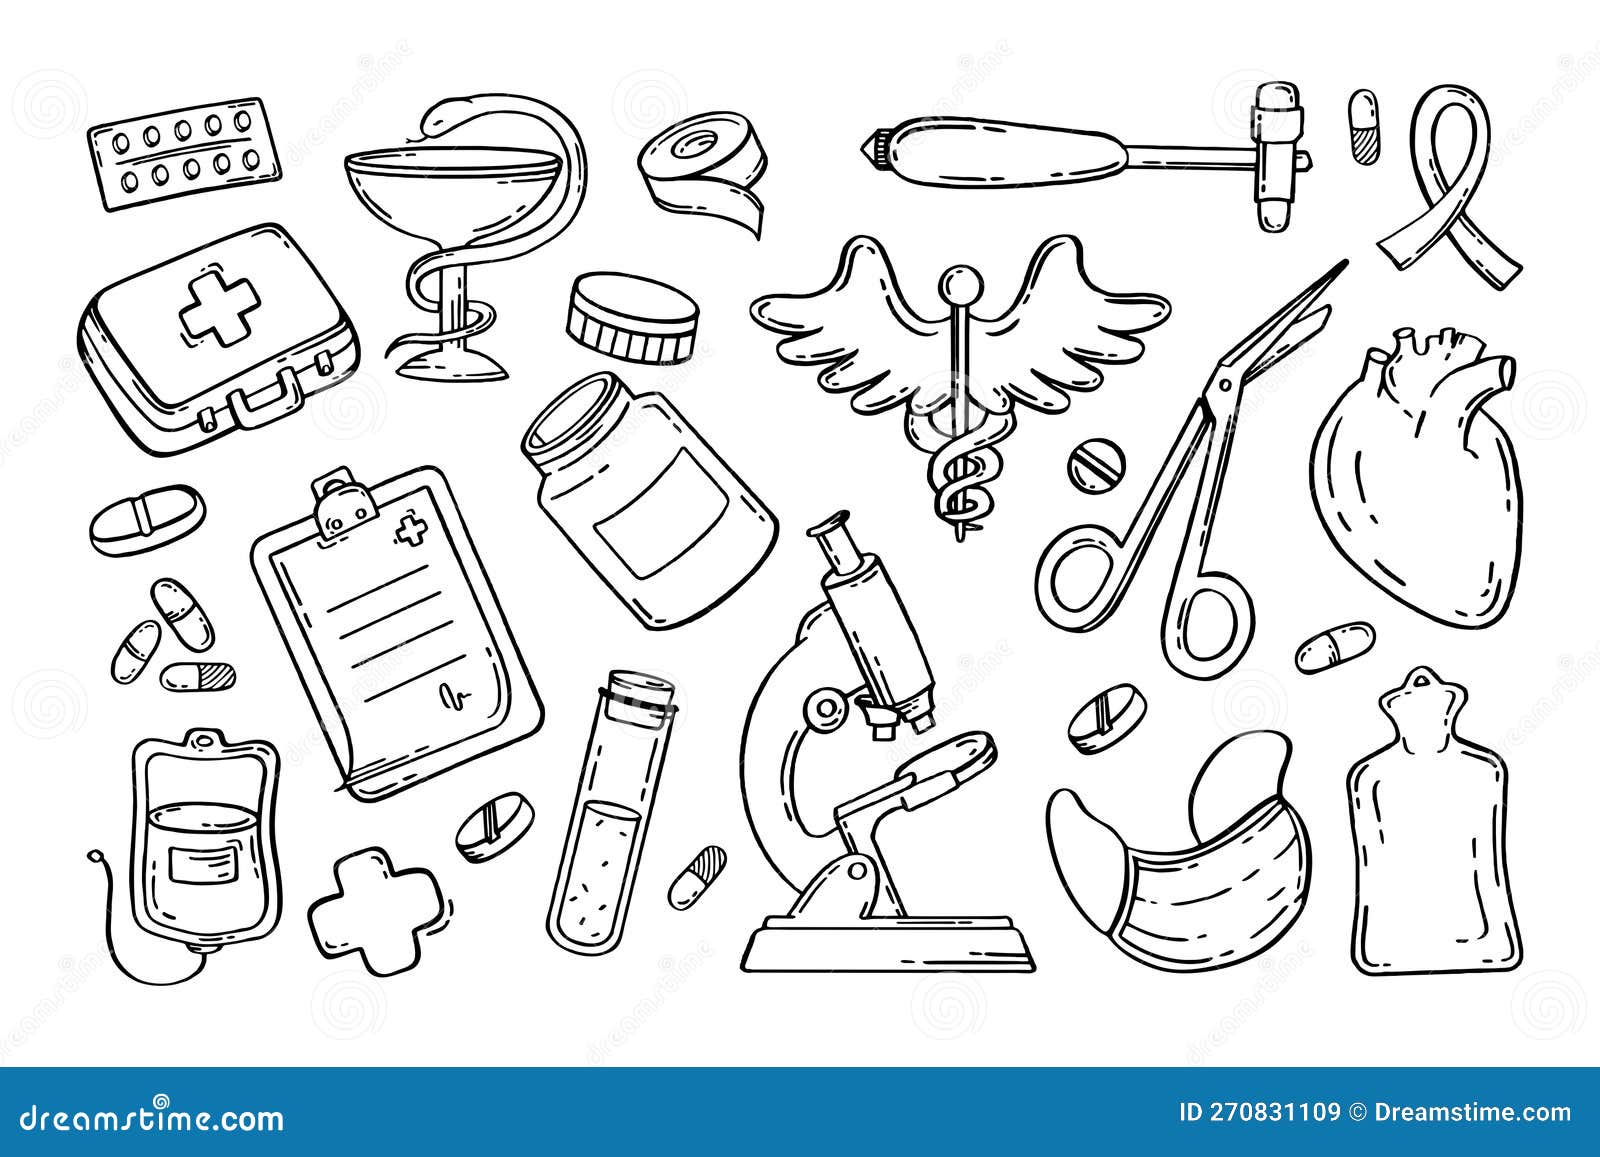 Medical Pharmaceutical Hospital Device Set of Drawings. Vector Illustration  of Medical Equipment, Hand Drawn Stock Vector - Illustration of doodle,  vial: 270831109